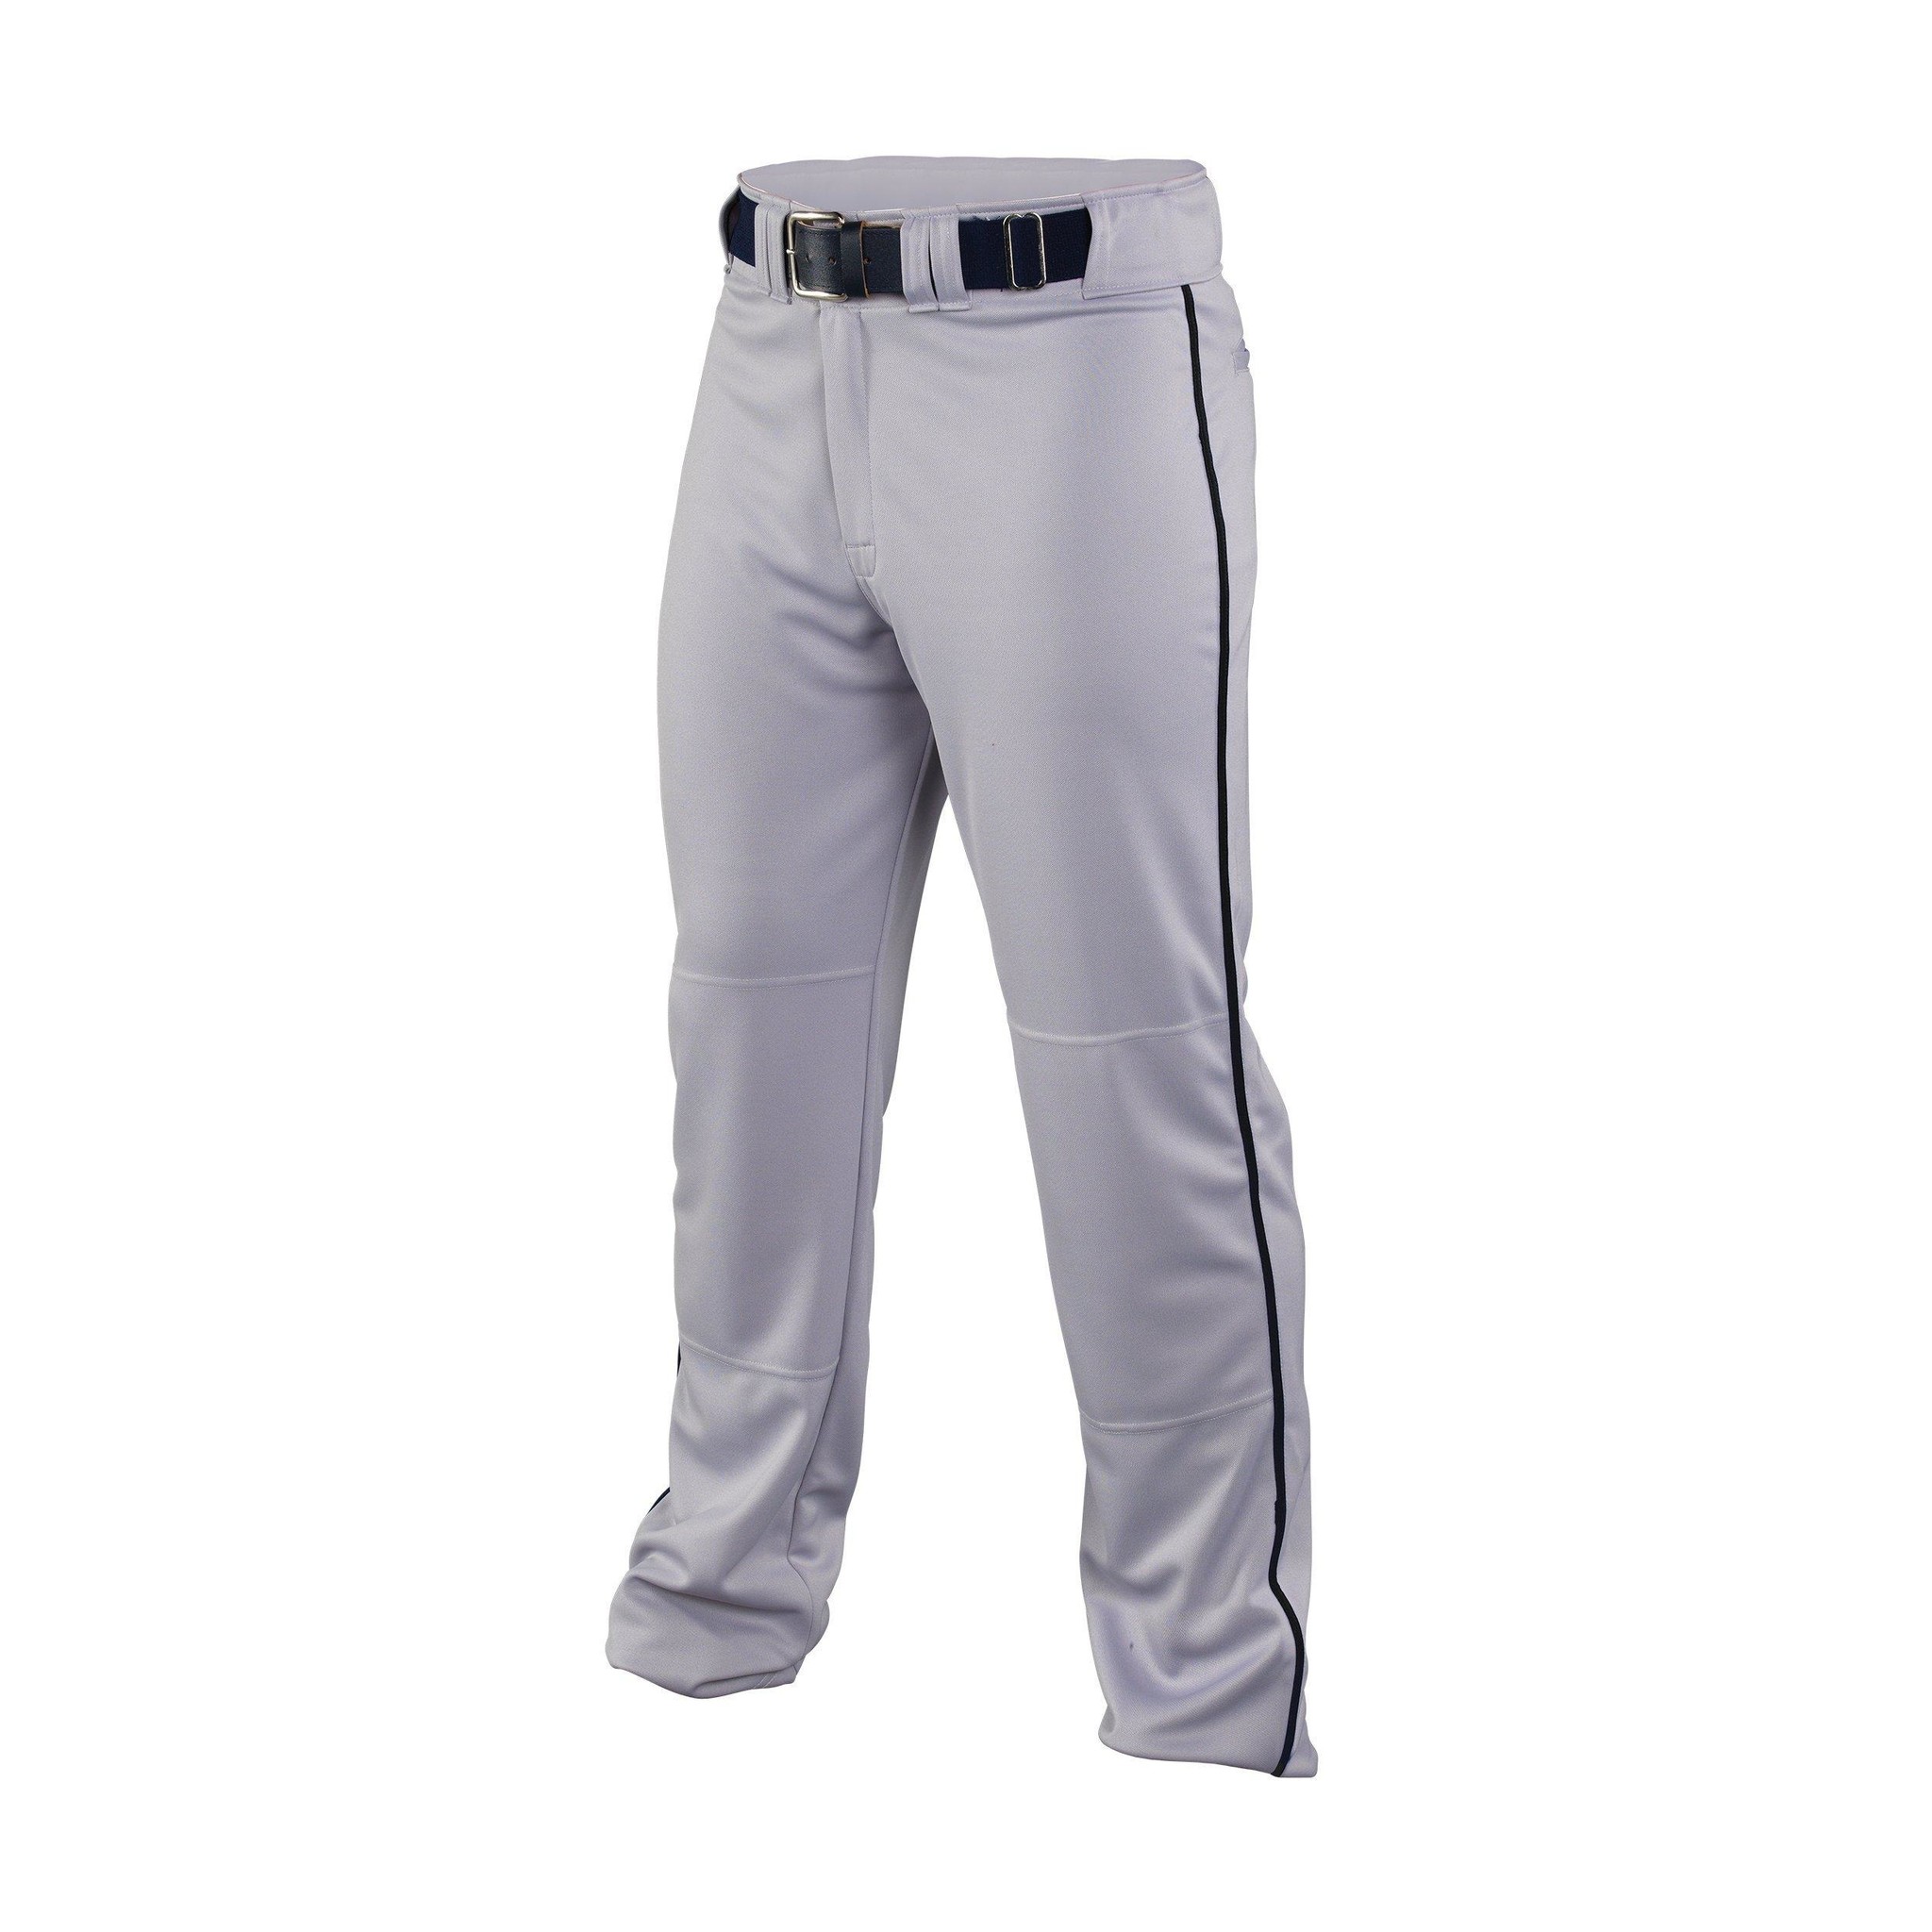 Details about   EASTON RIVAL 2 ADULT BASEBALL PANT S SMALL GRAY BLACK PIPED OPEN BOTTOM NEW NWT 